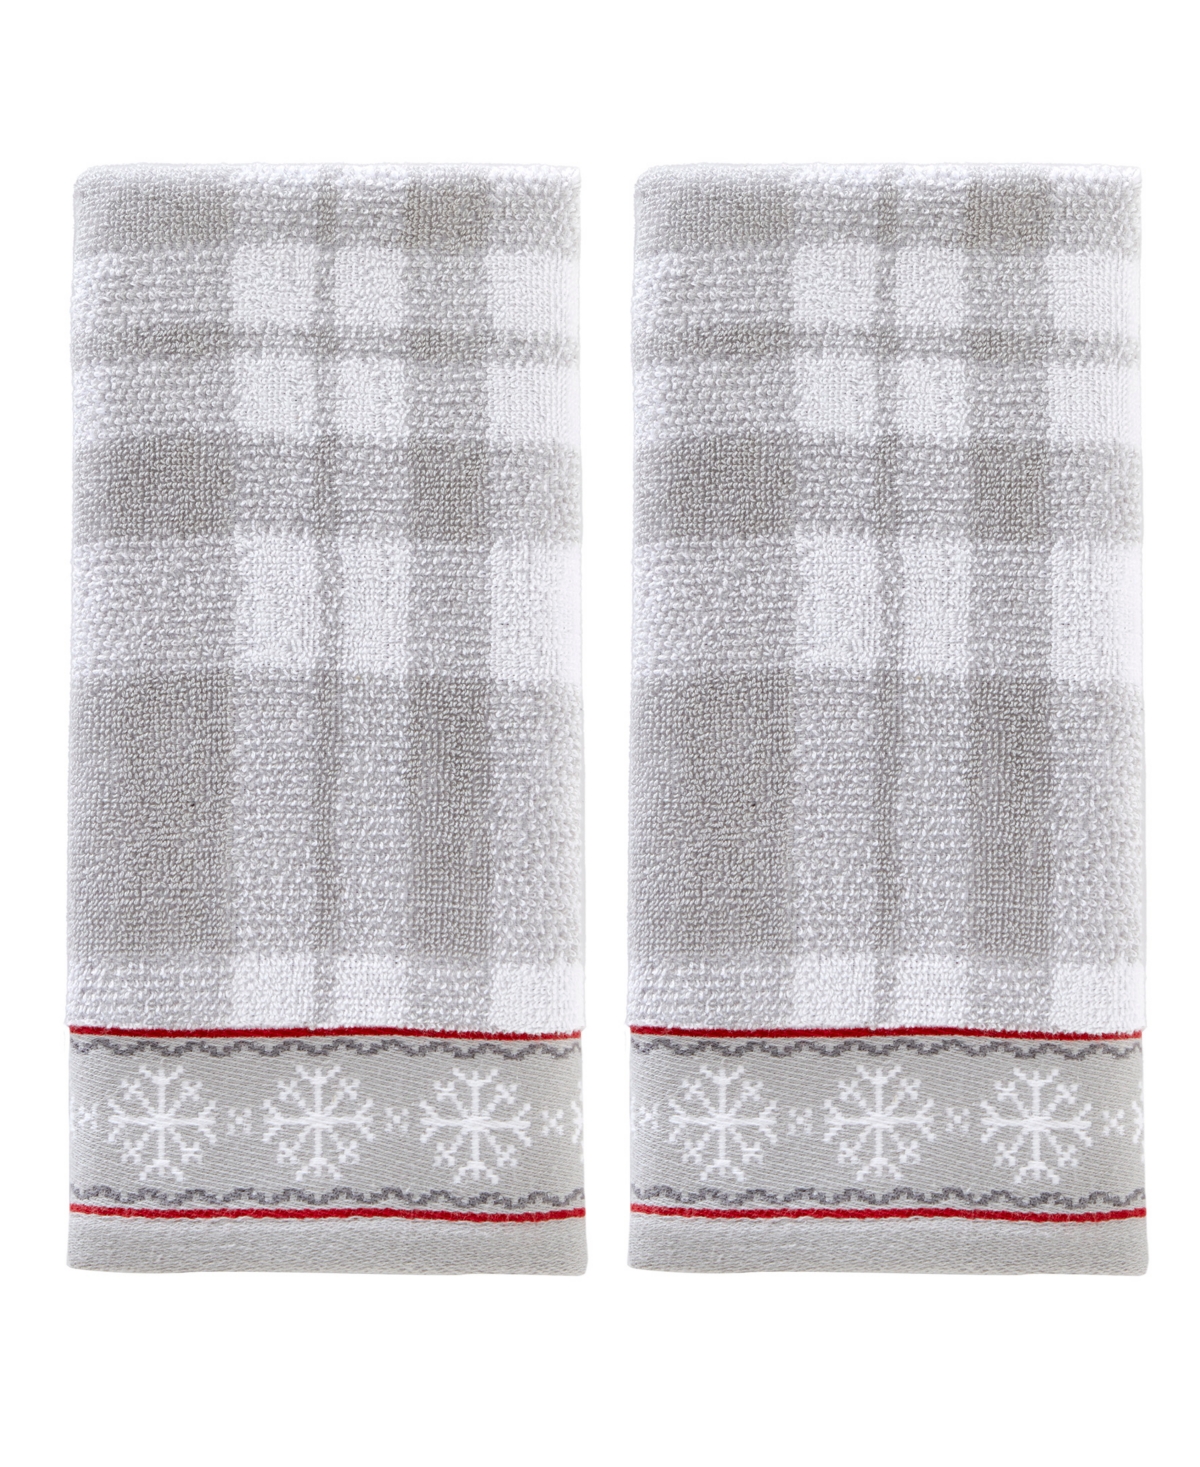 Skl Home Whistler Plaid Cotton 2 Piece Hand Towel Set In Gray,plaid